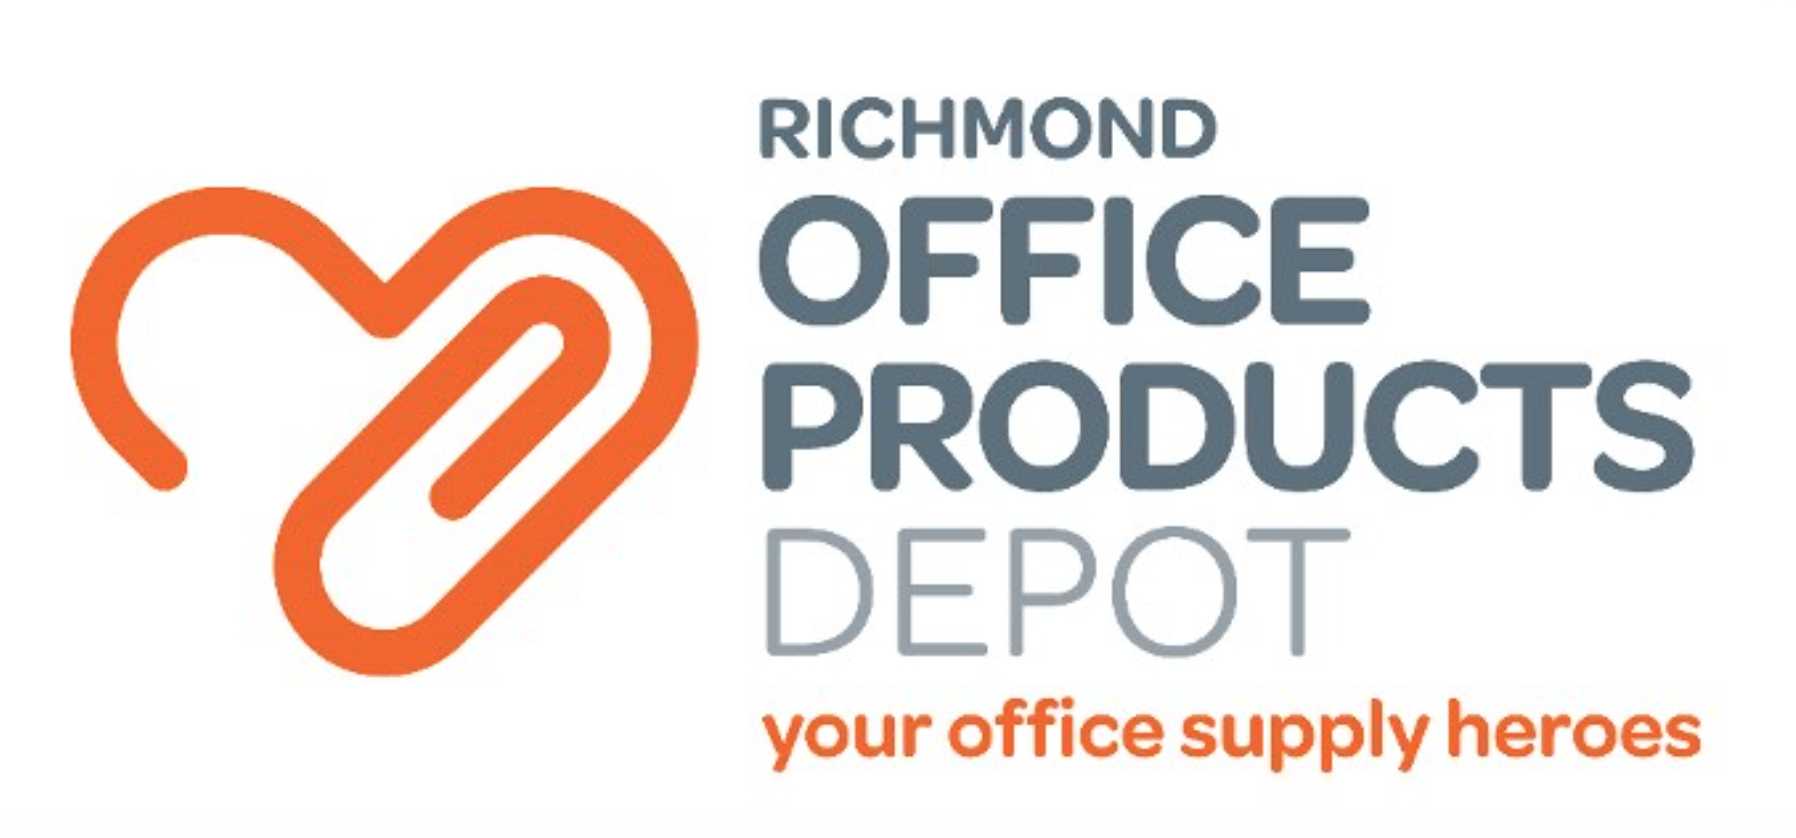 Office Products Depot